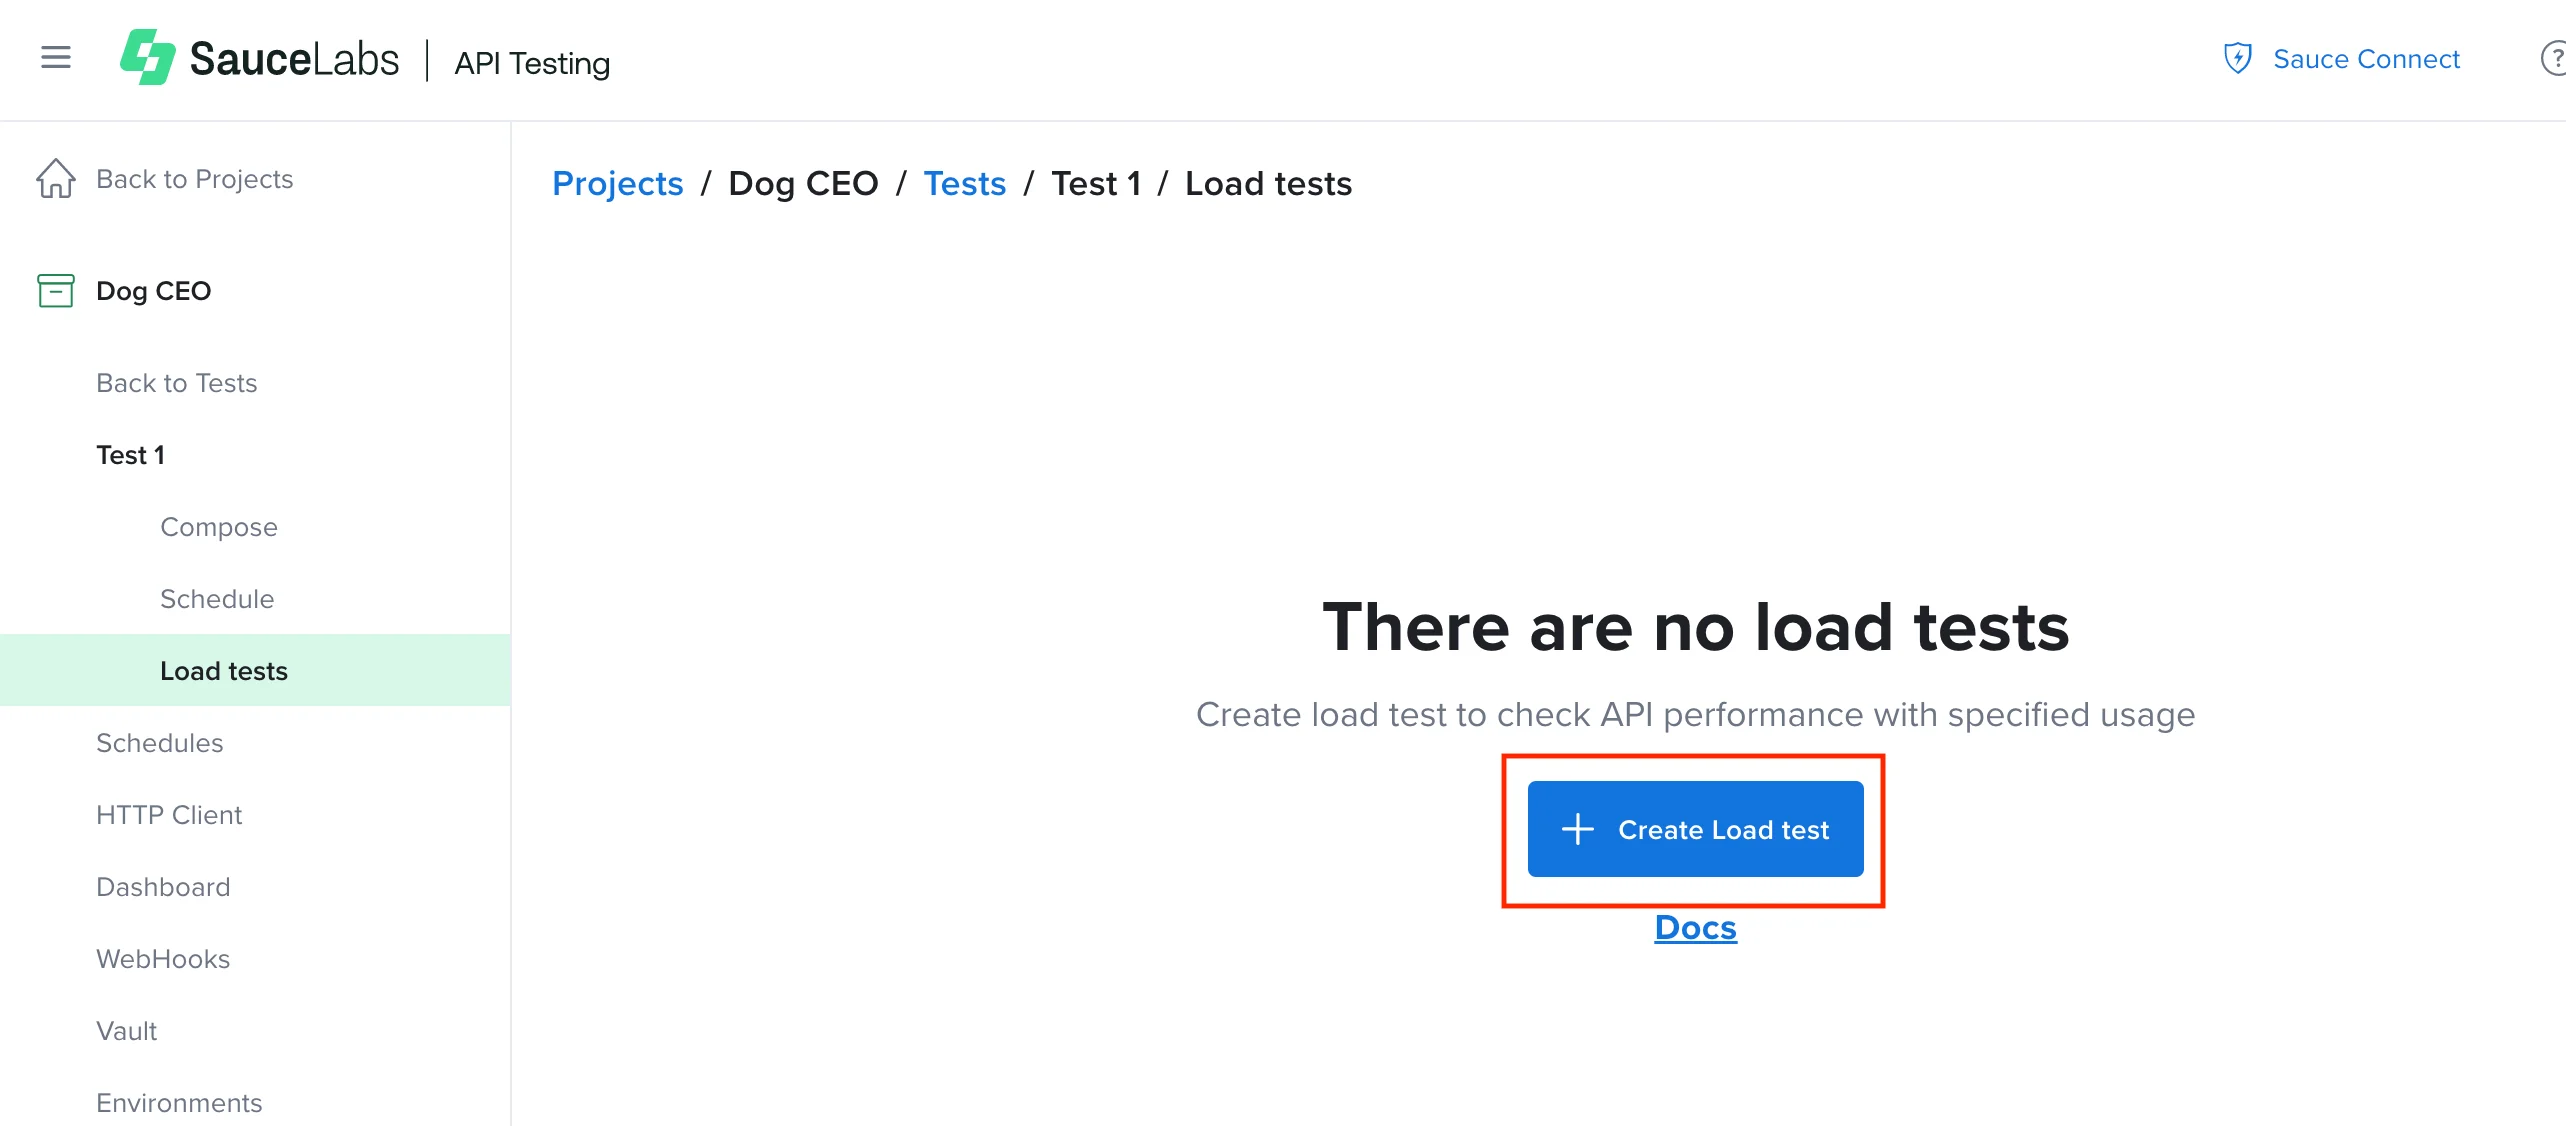 The Create Load test button